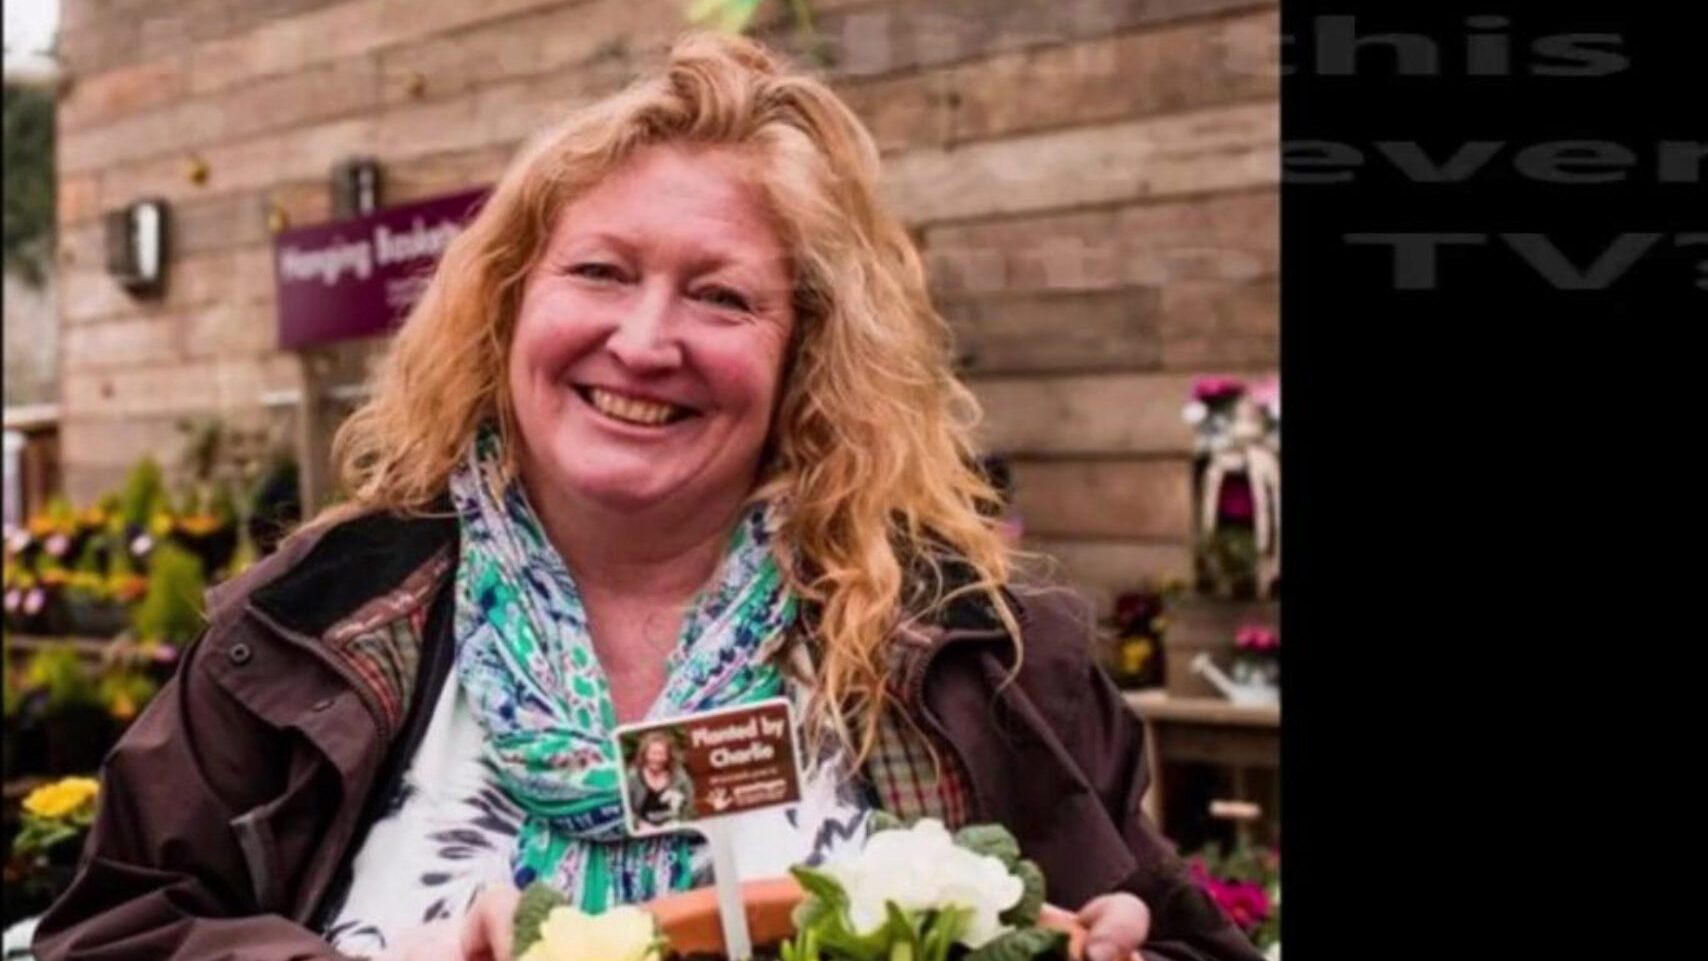 Charlie Dimmock A dame who made a career on TV out of flashing her teats and juggling bra-free mambos